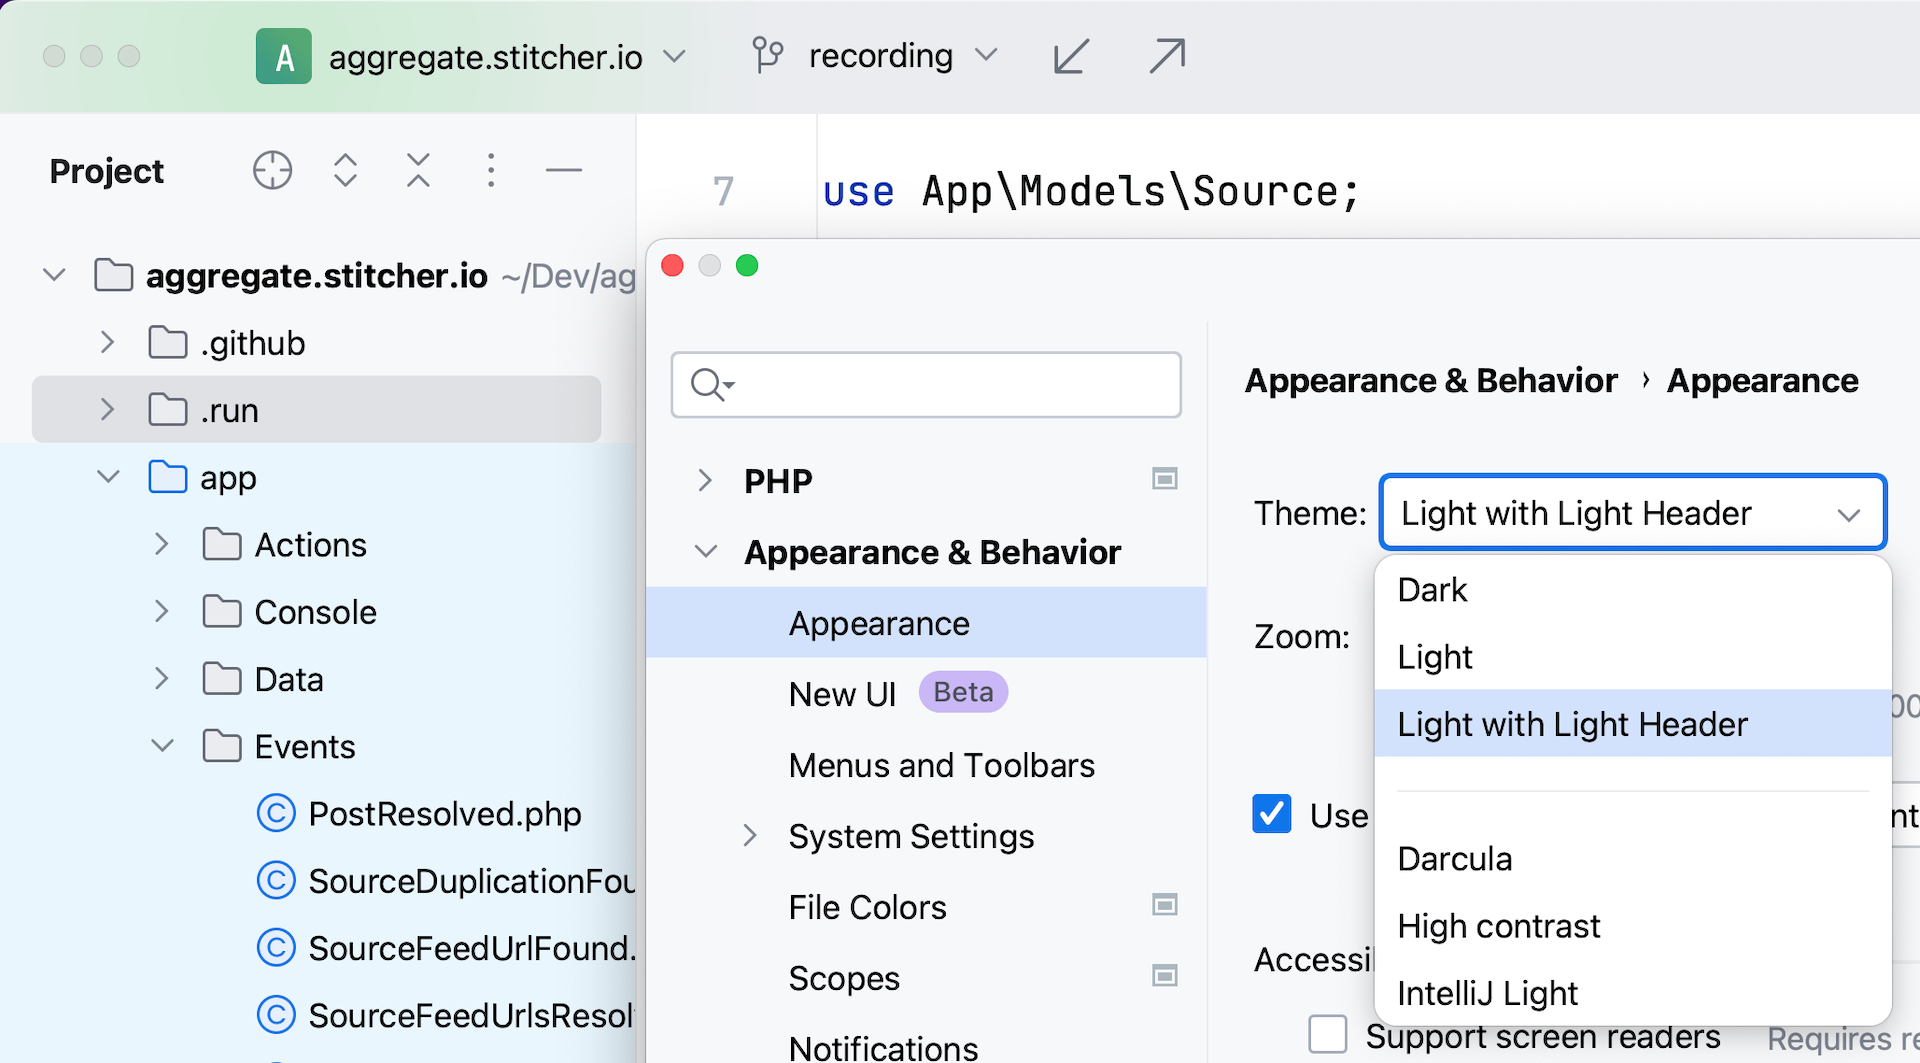 Light theme with Light Header in the new UI